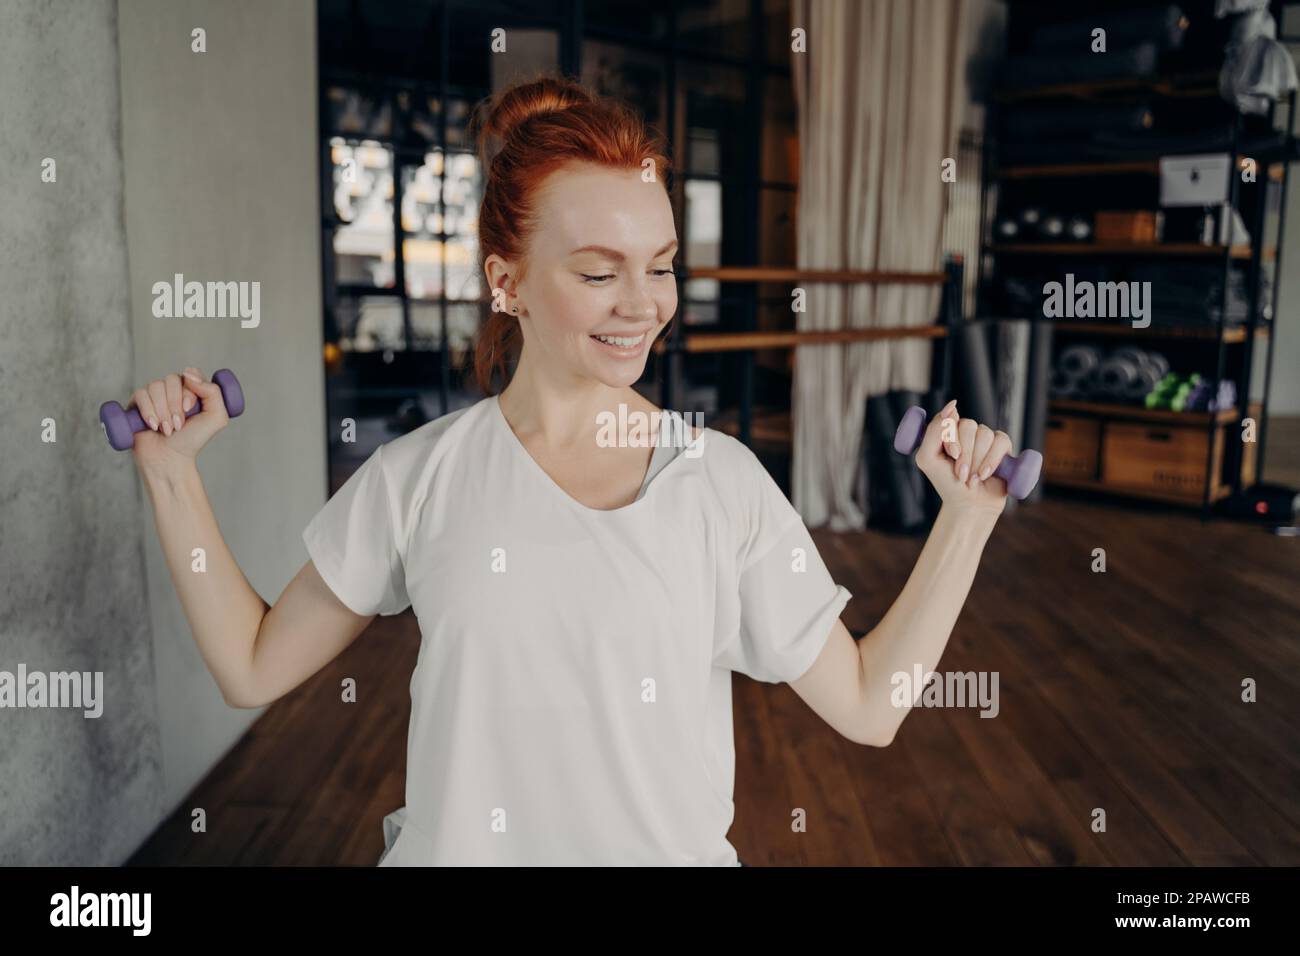 Healthy lifestyle. Young happy slim beautiful woman with red hair in bun working out in fitness studio, holding dumbbells and doing exercise for stron Stock Photo